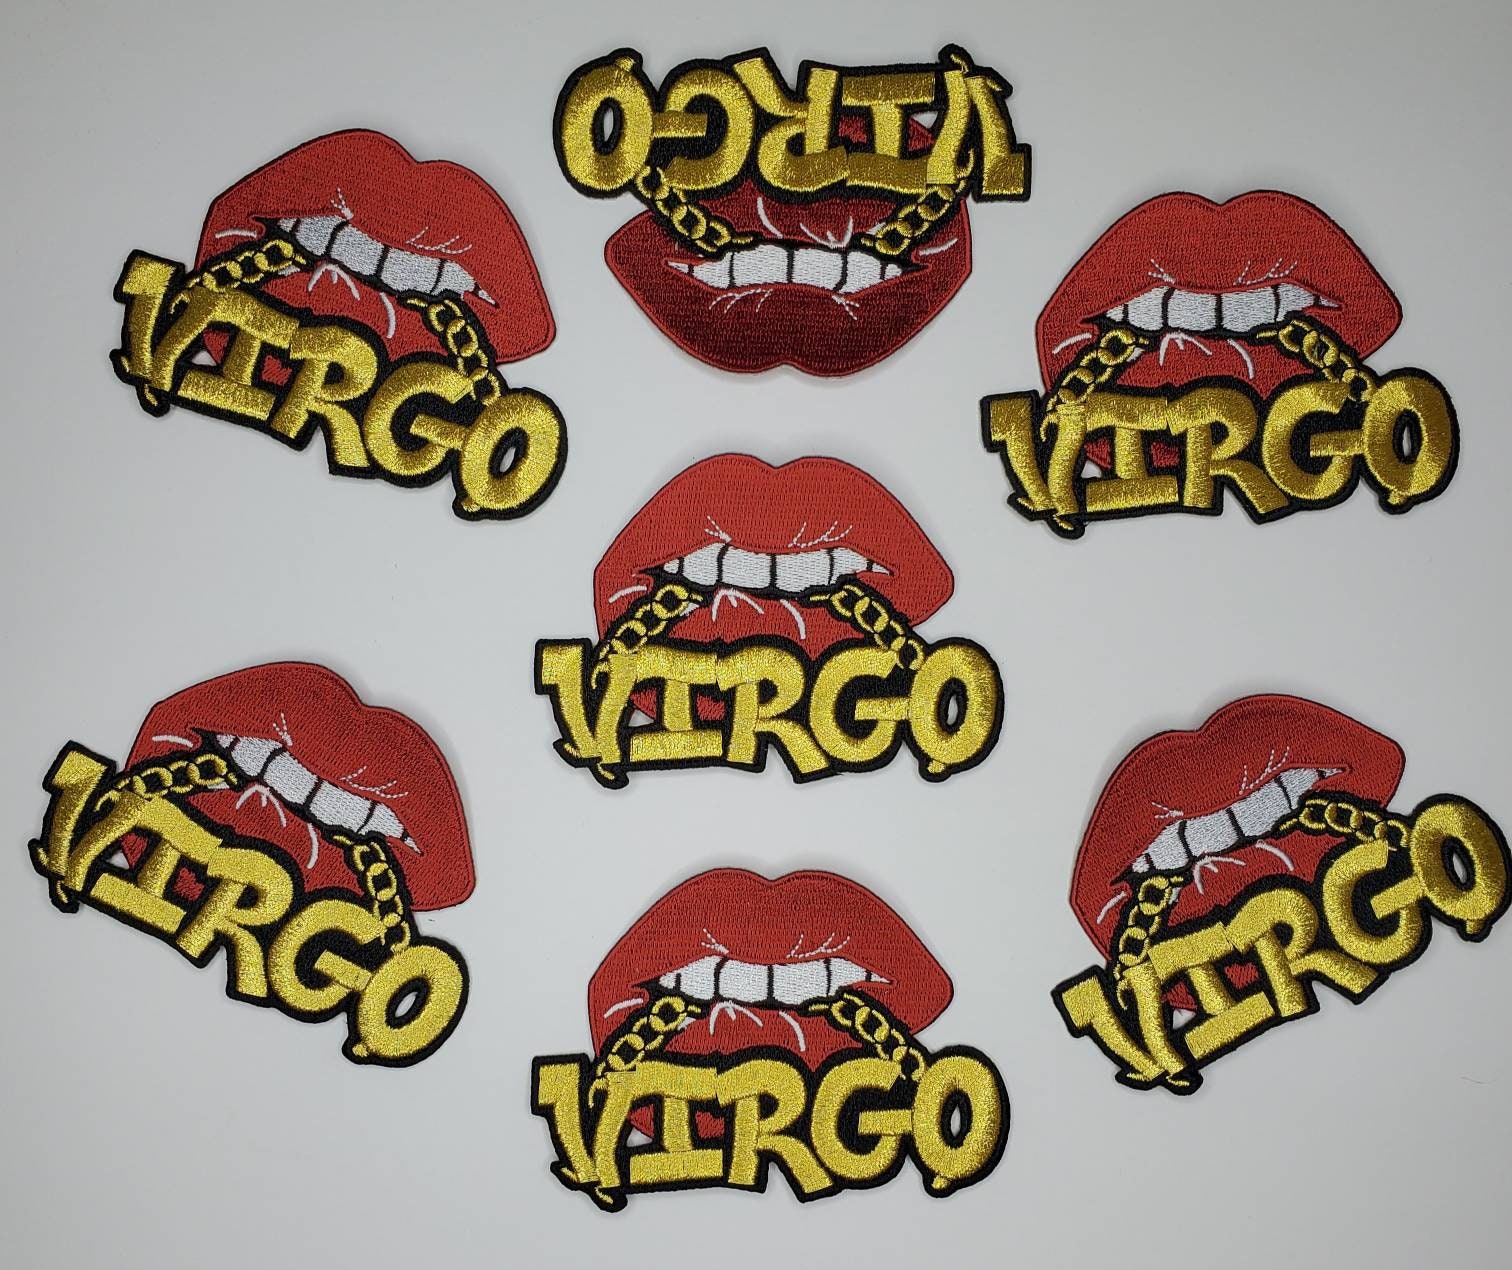 Poppin' Red Lip "Virgo" w/Gold Metallic Chain|Iron-On Patch|Astrology Applique|Cool Embroidered Patch|DIY Patch for Denim & Accessories